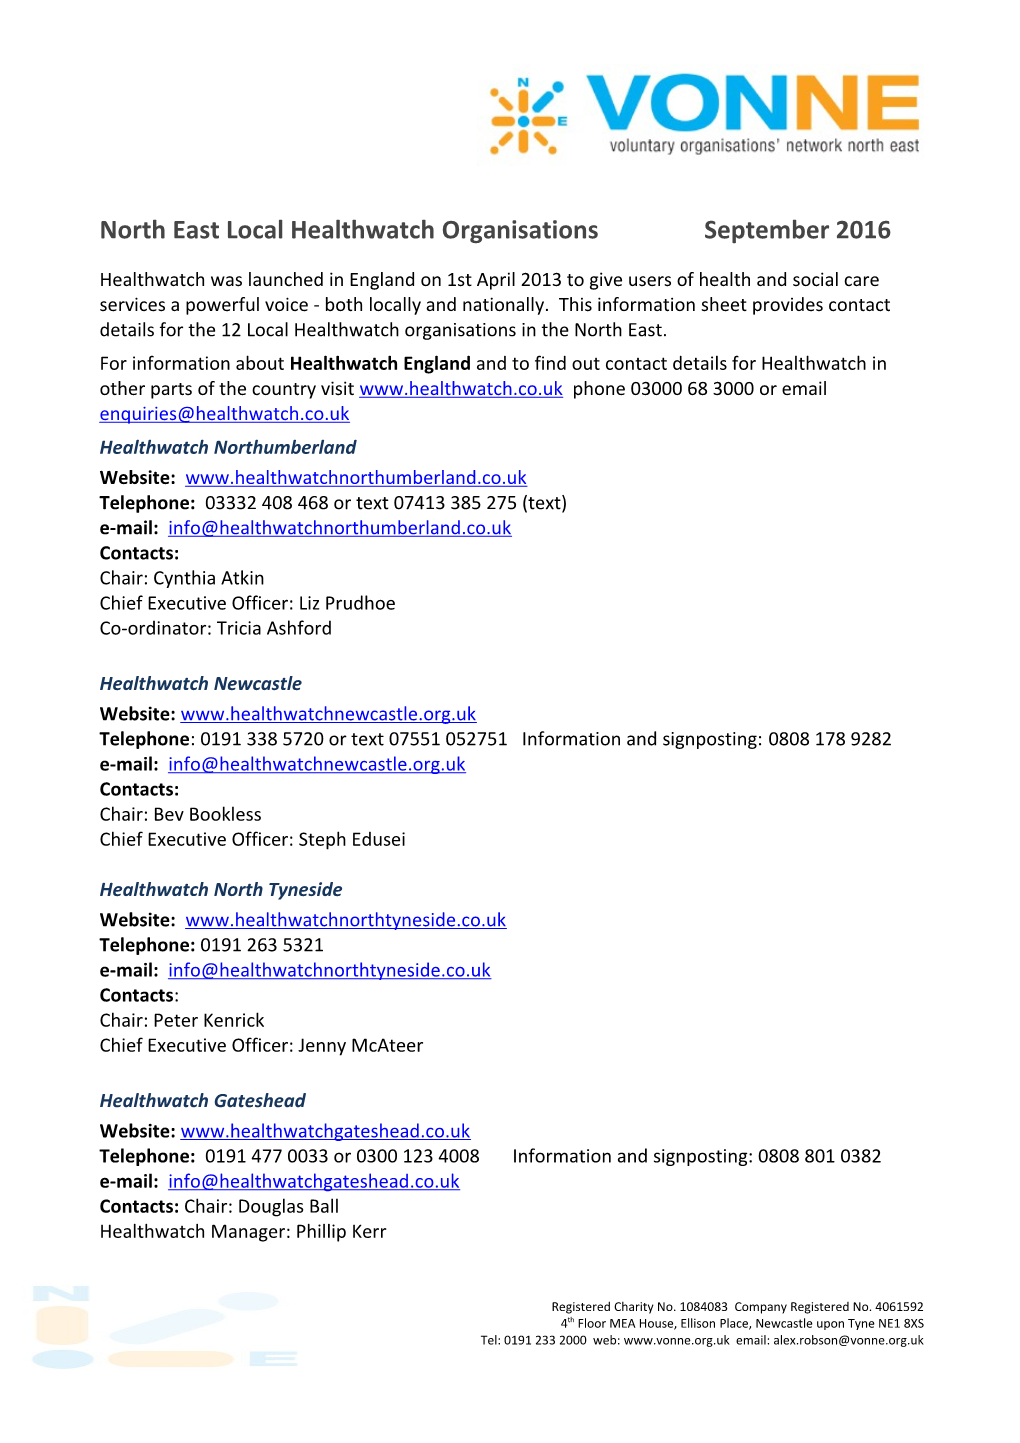 North East Local Healthwatch Organisations September 2016